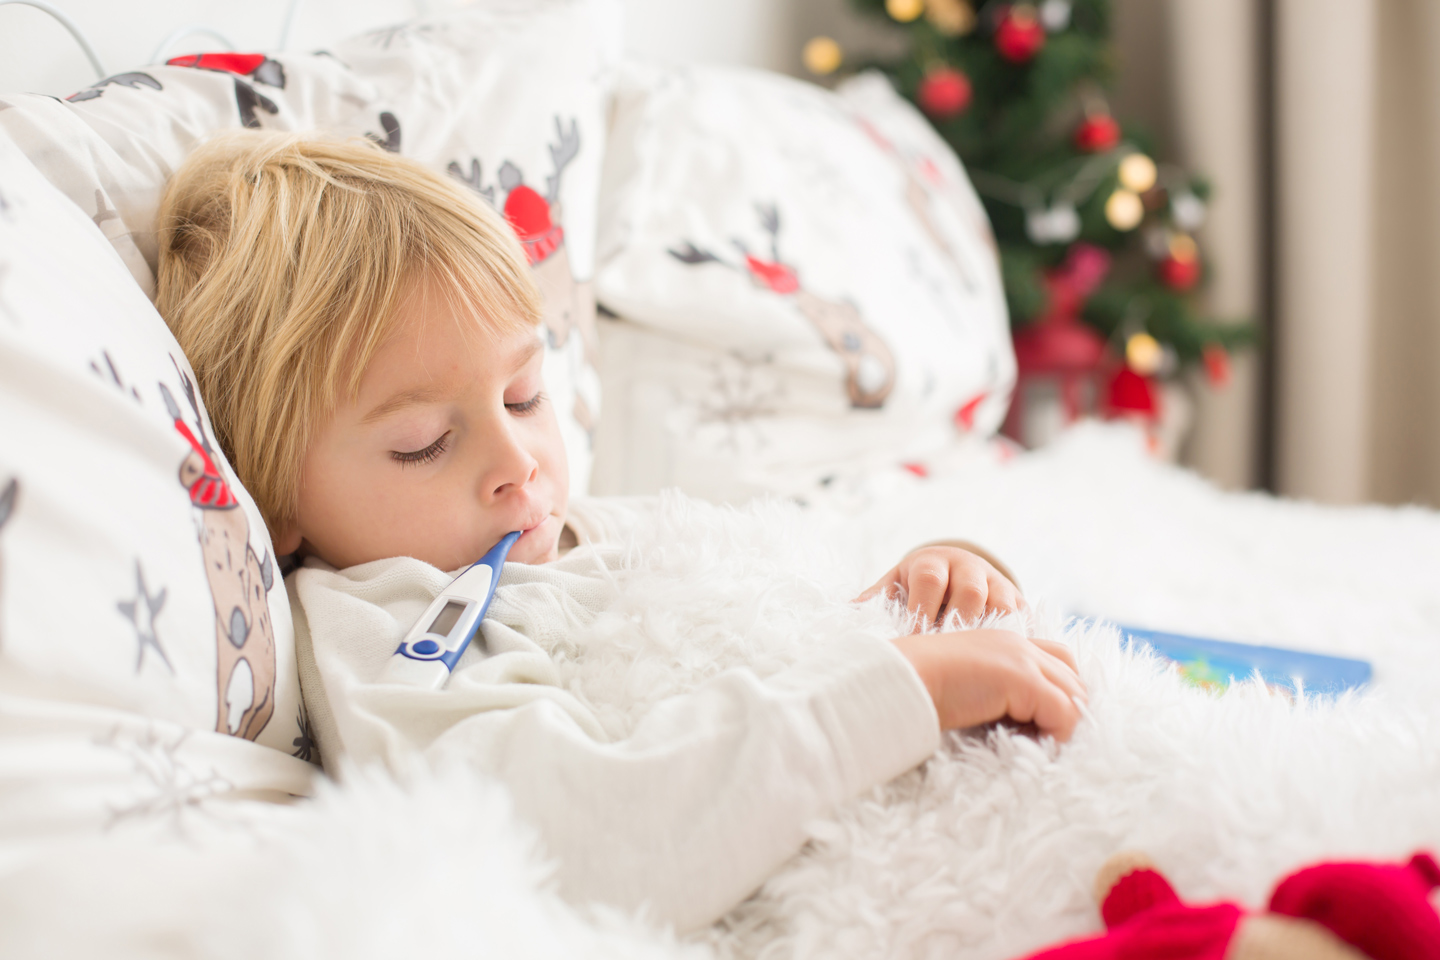 Young child with RSV during the holidays